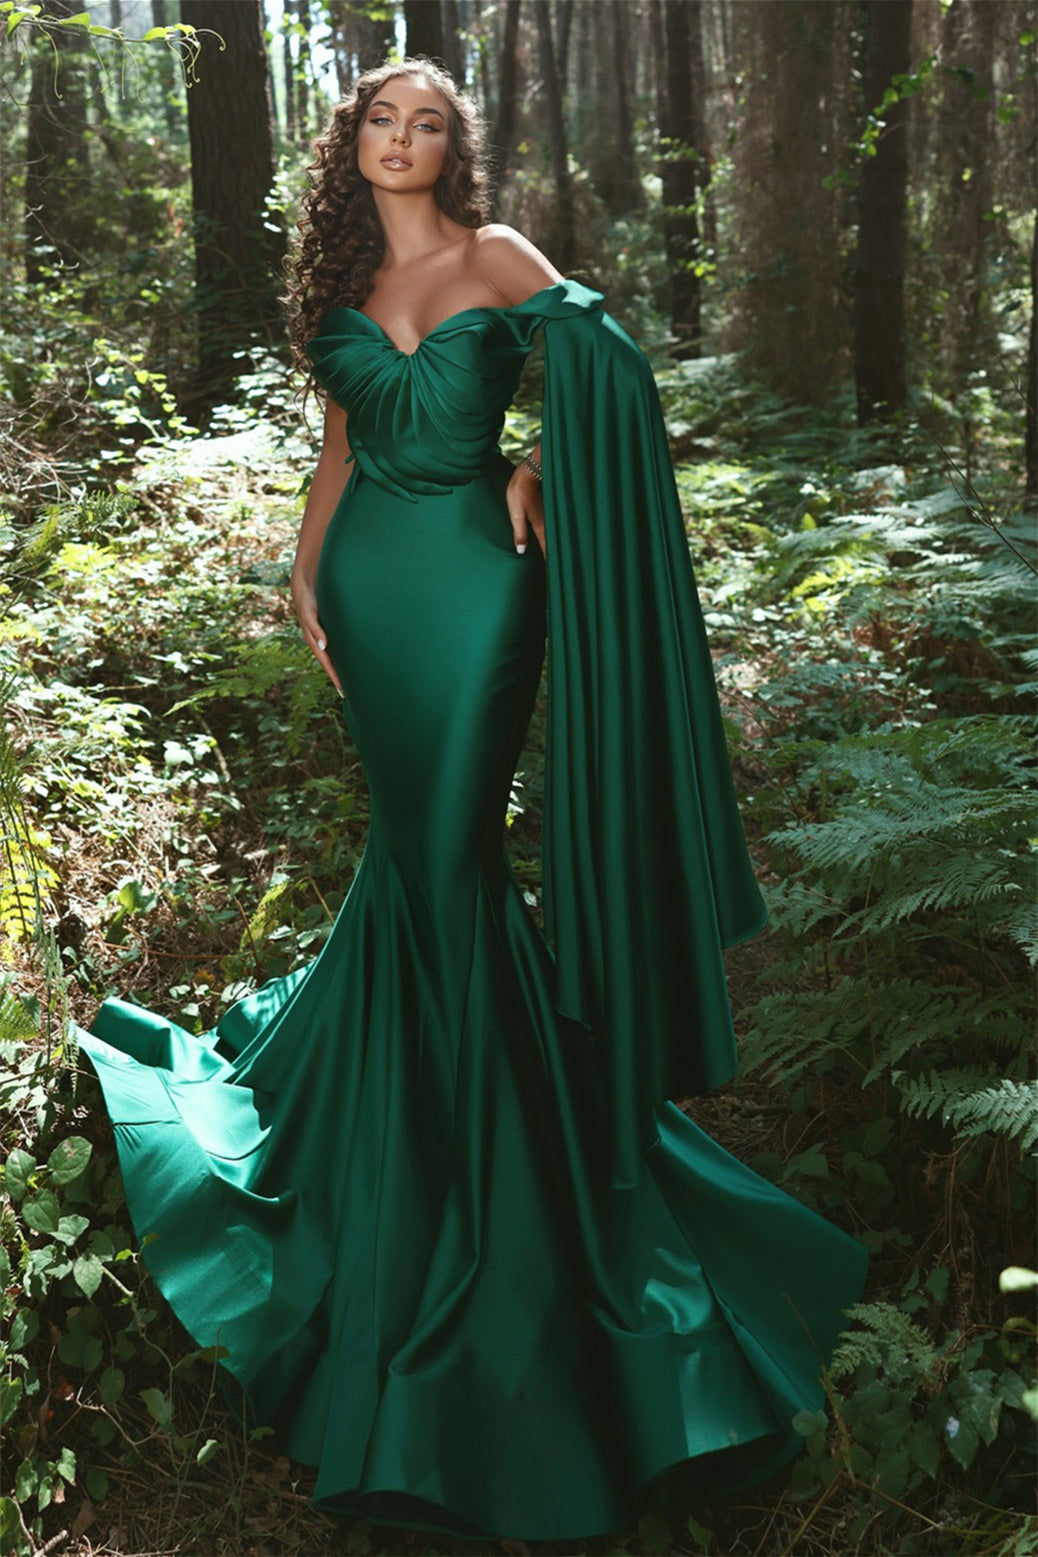 Classic Emerald Green Mermaid Prom Dress with Ruffles Sleeve and Sweetheart Neckline-Occasion Dress-BallBride